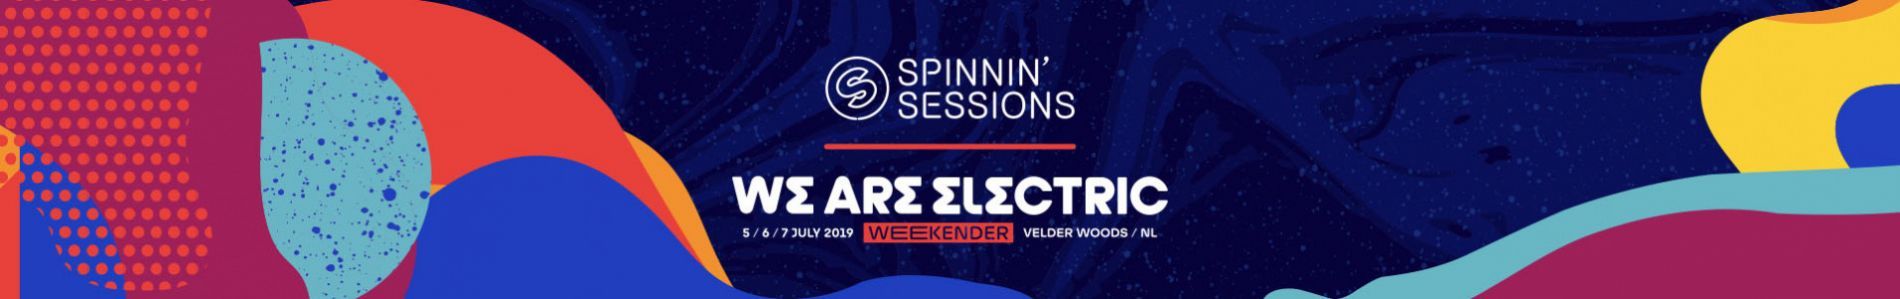 Spinnin' Sessions Spinnin' Sessions at We Are Electric | The Netherlands